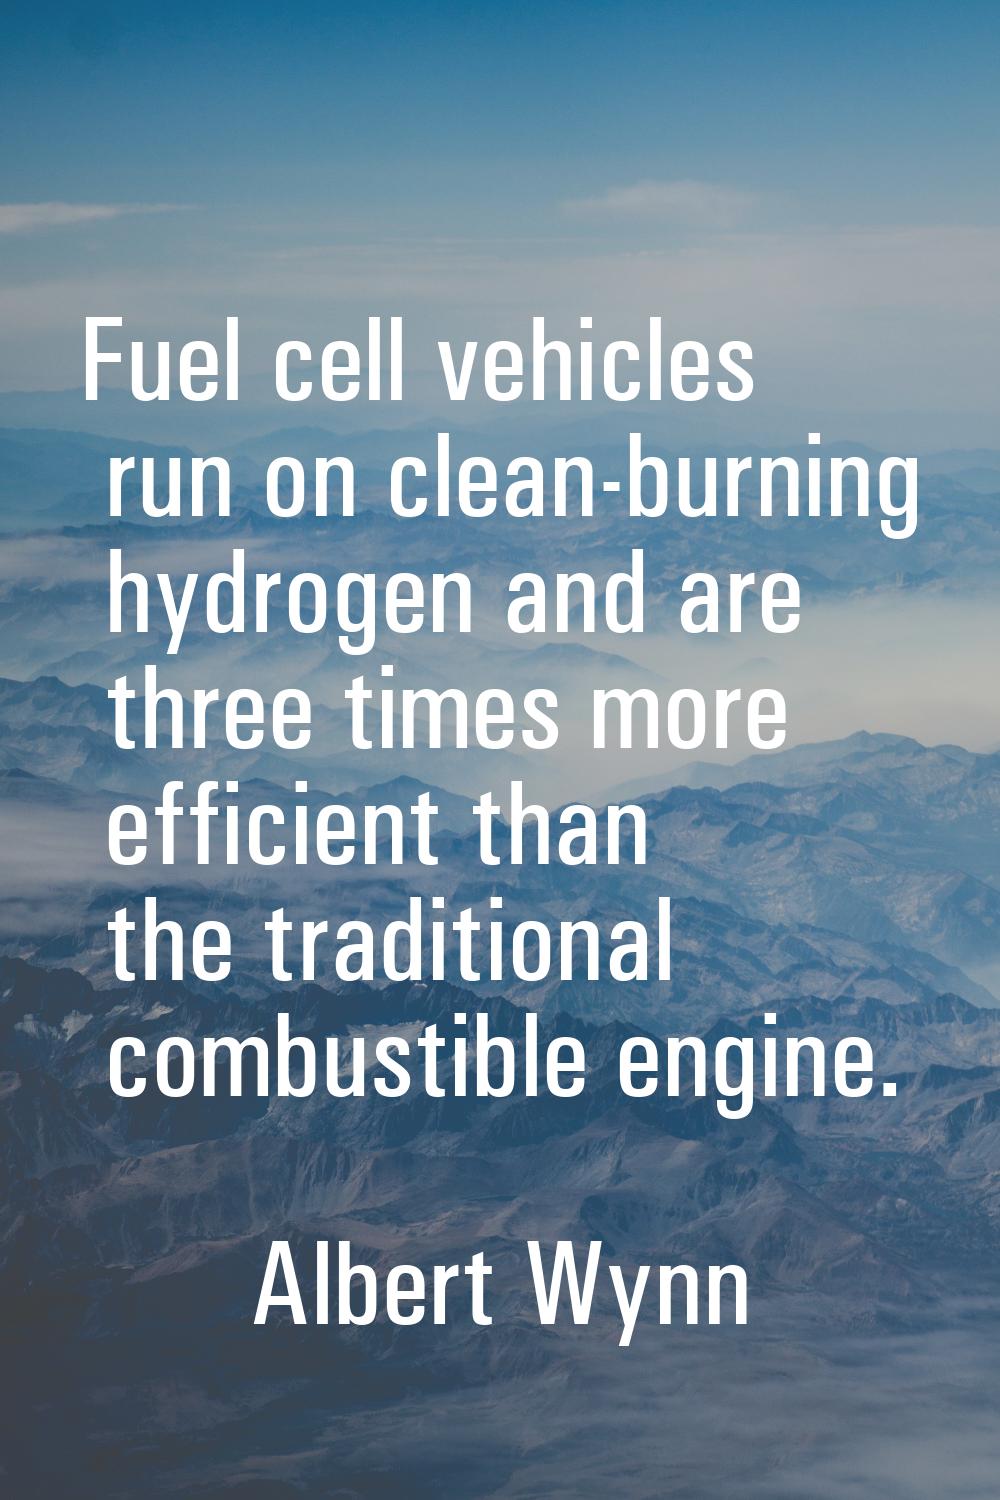 Fuel cell vehicles run on clean-burning hydrogen and are three times more efficient than the tradit